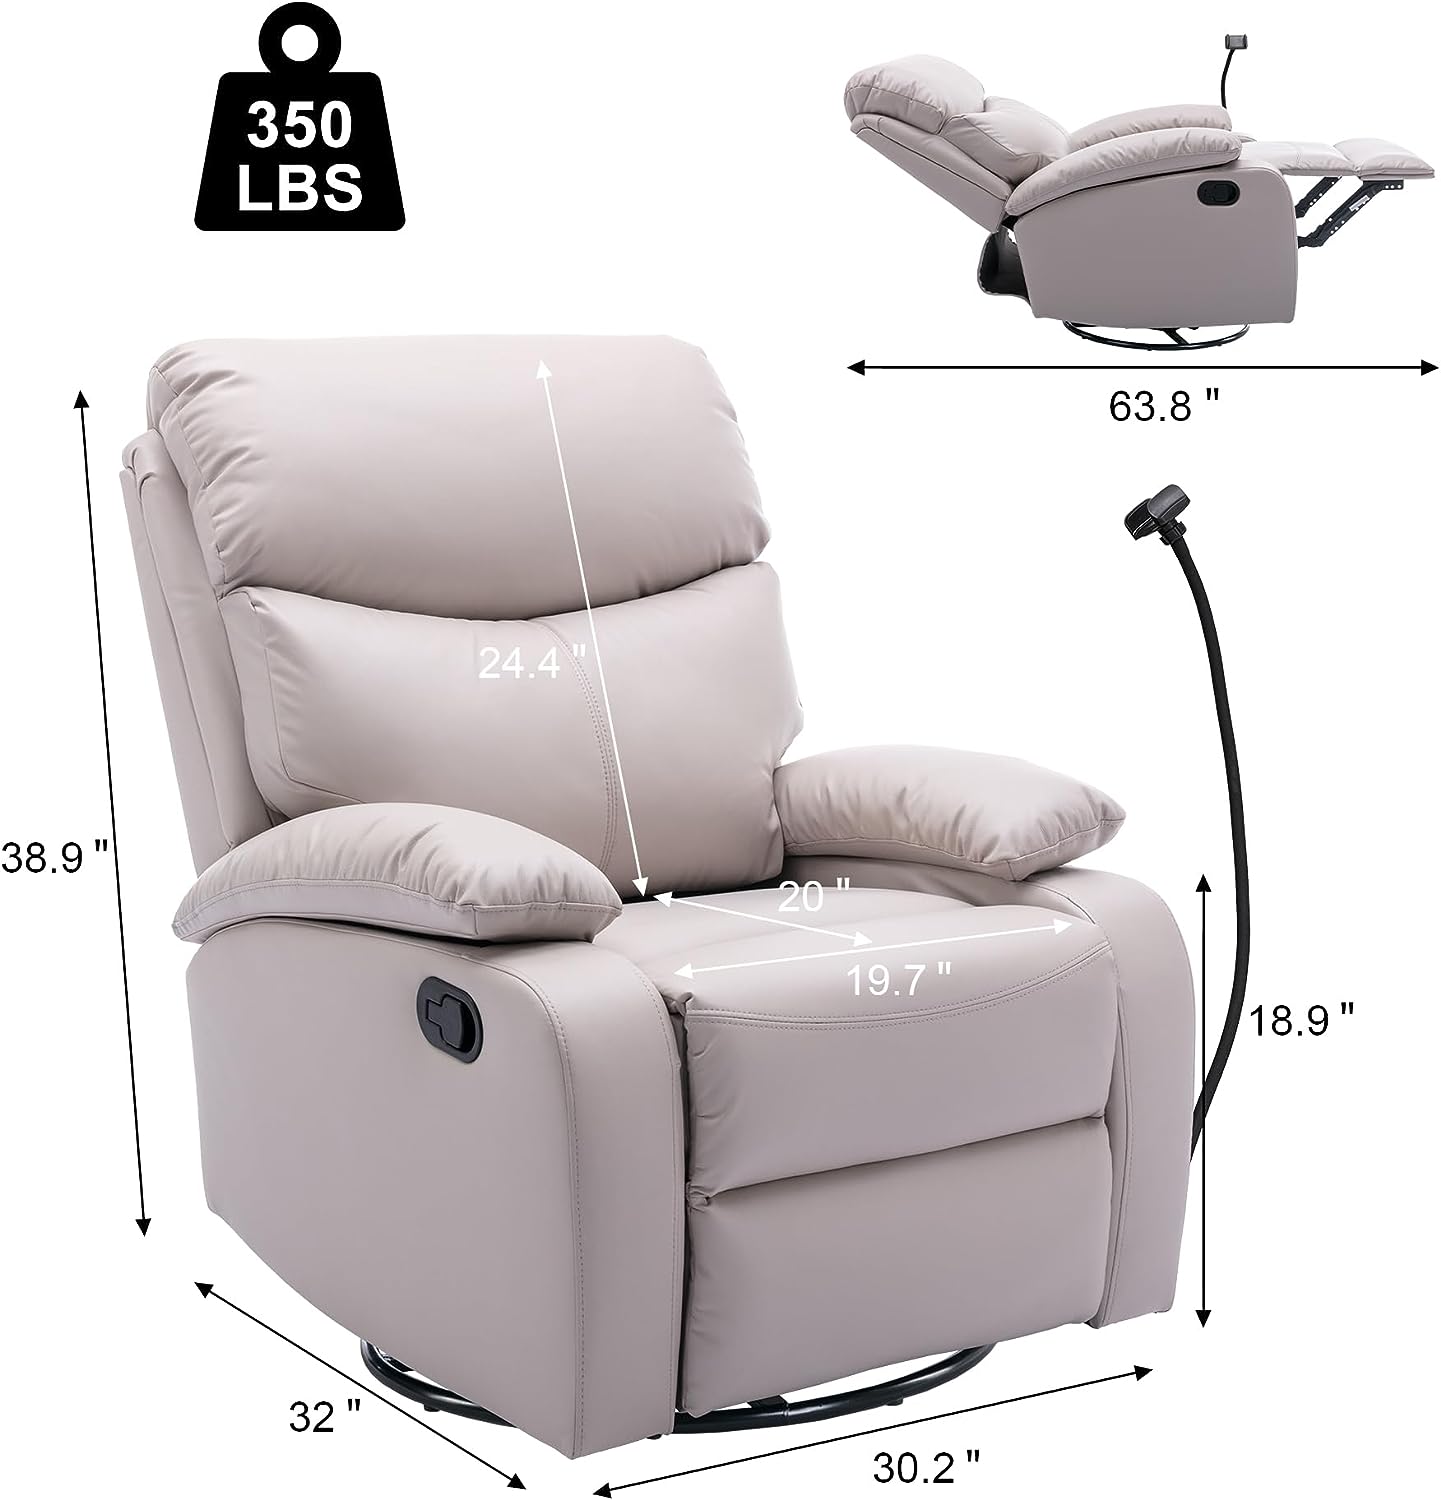 hzlagm Swivel Rocking Recliner Chair with New Technology Fabric Easy to ...